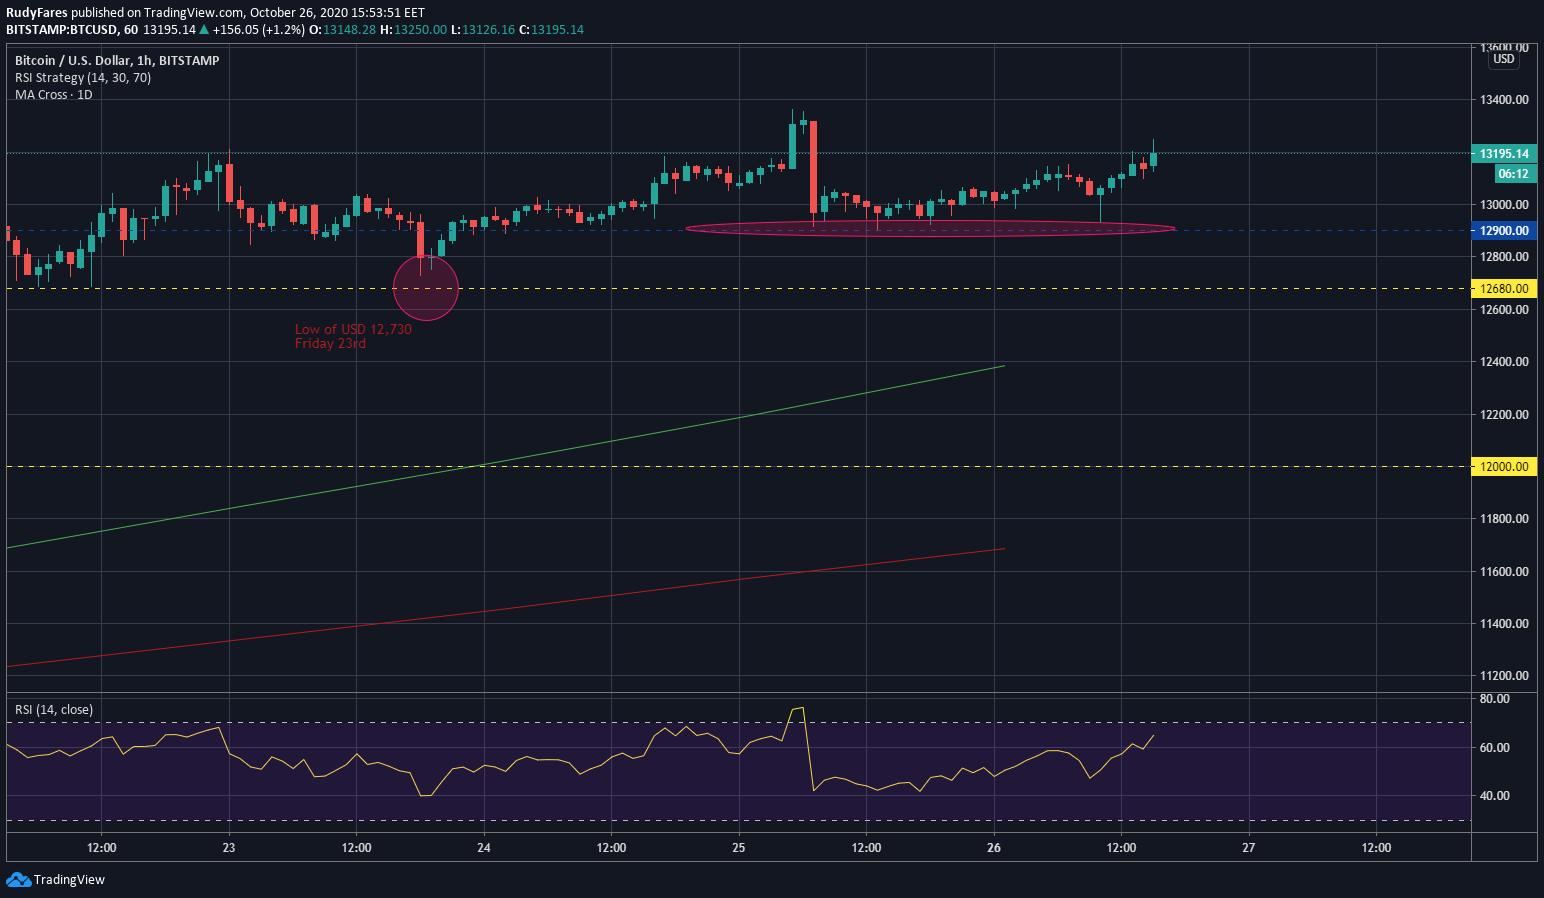 BTC/USD price 1H chart, strong support tested 4 times